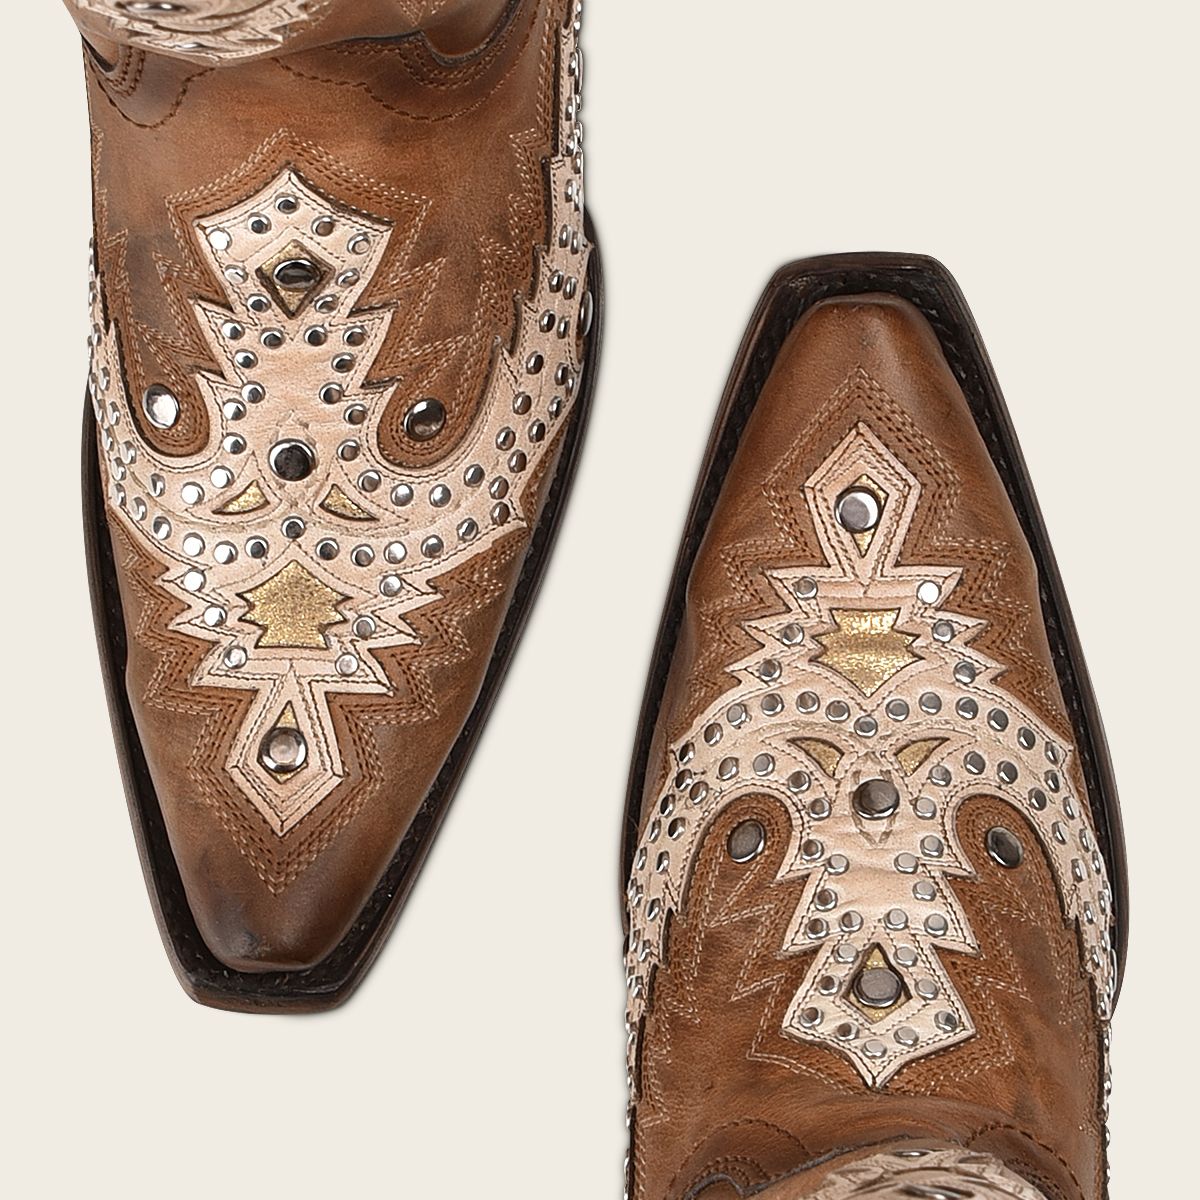 Honey brown leather cowboy style boot with shiny finish